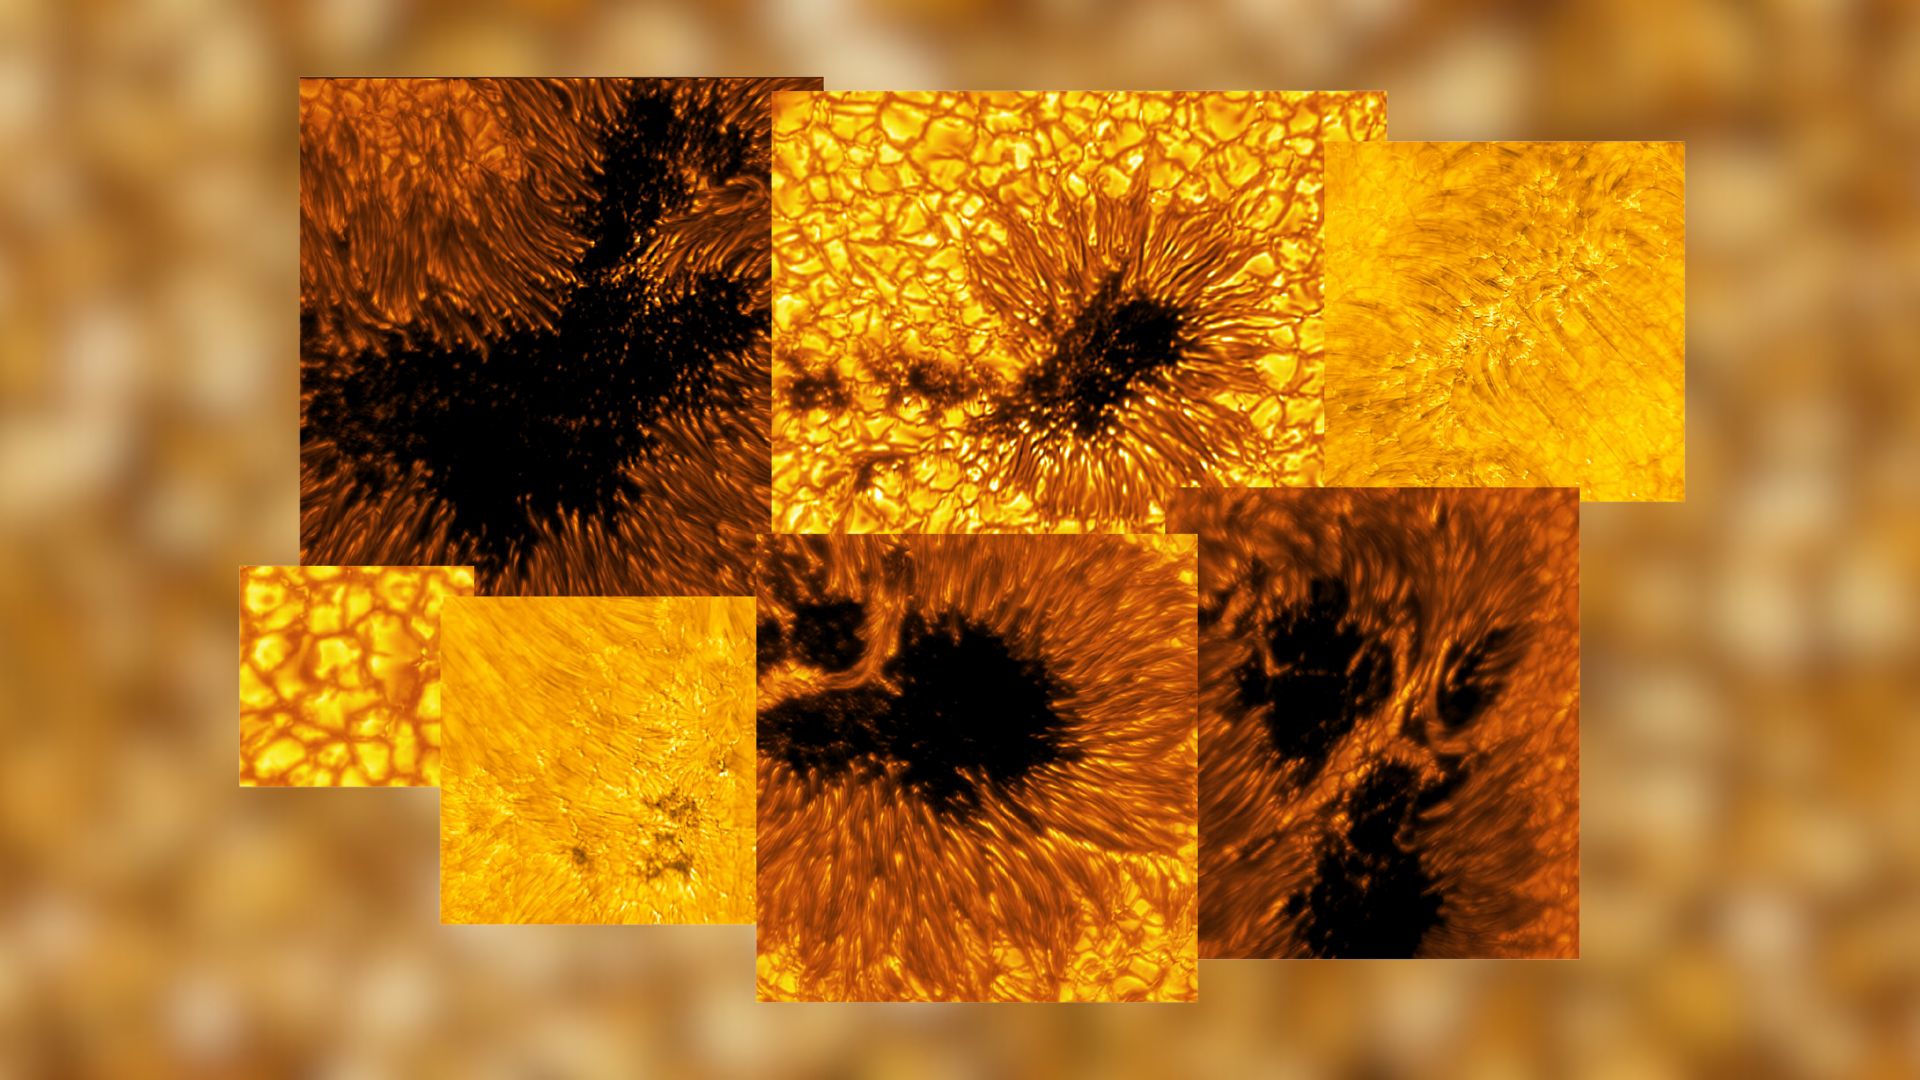 These sunspots are larger than Earth